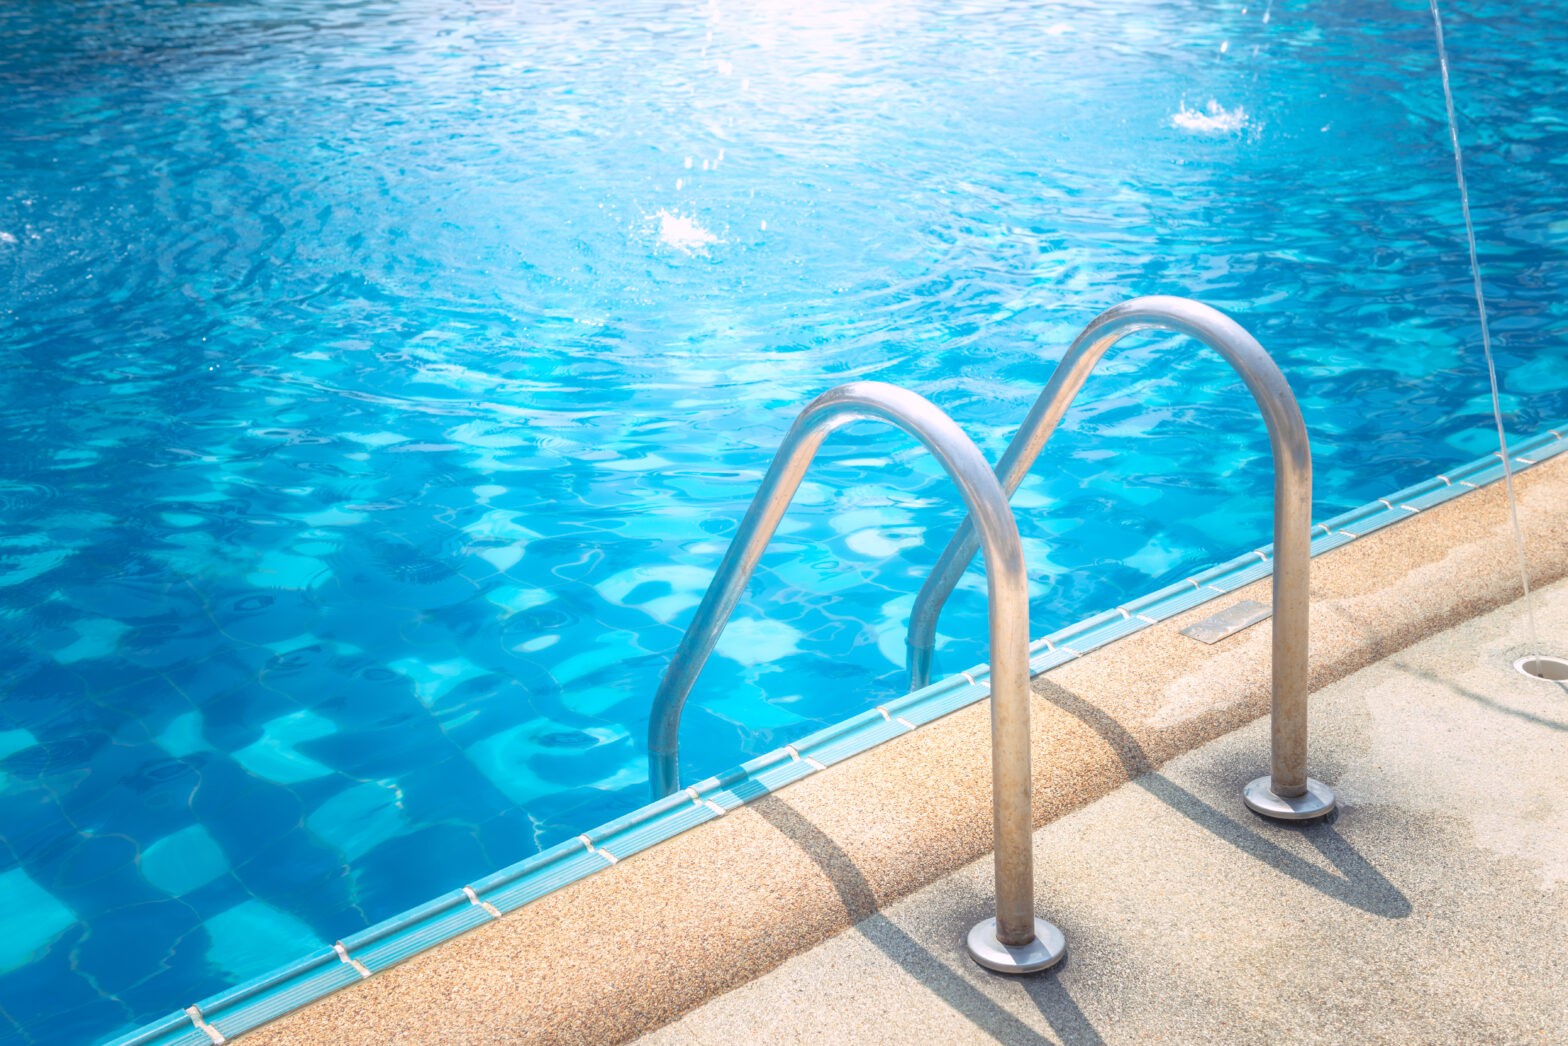 Grab,Bars,Ladder,In,The,Blue,Swimming,Pool